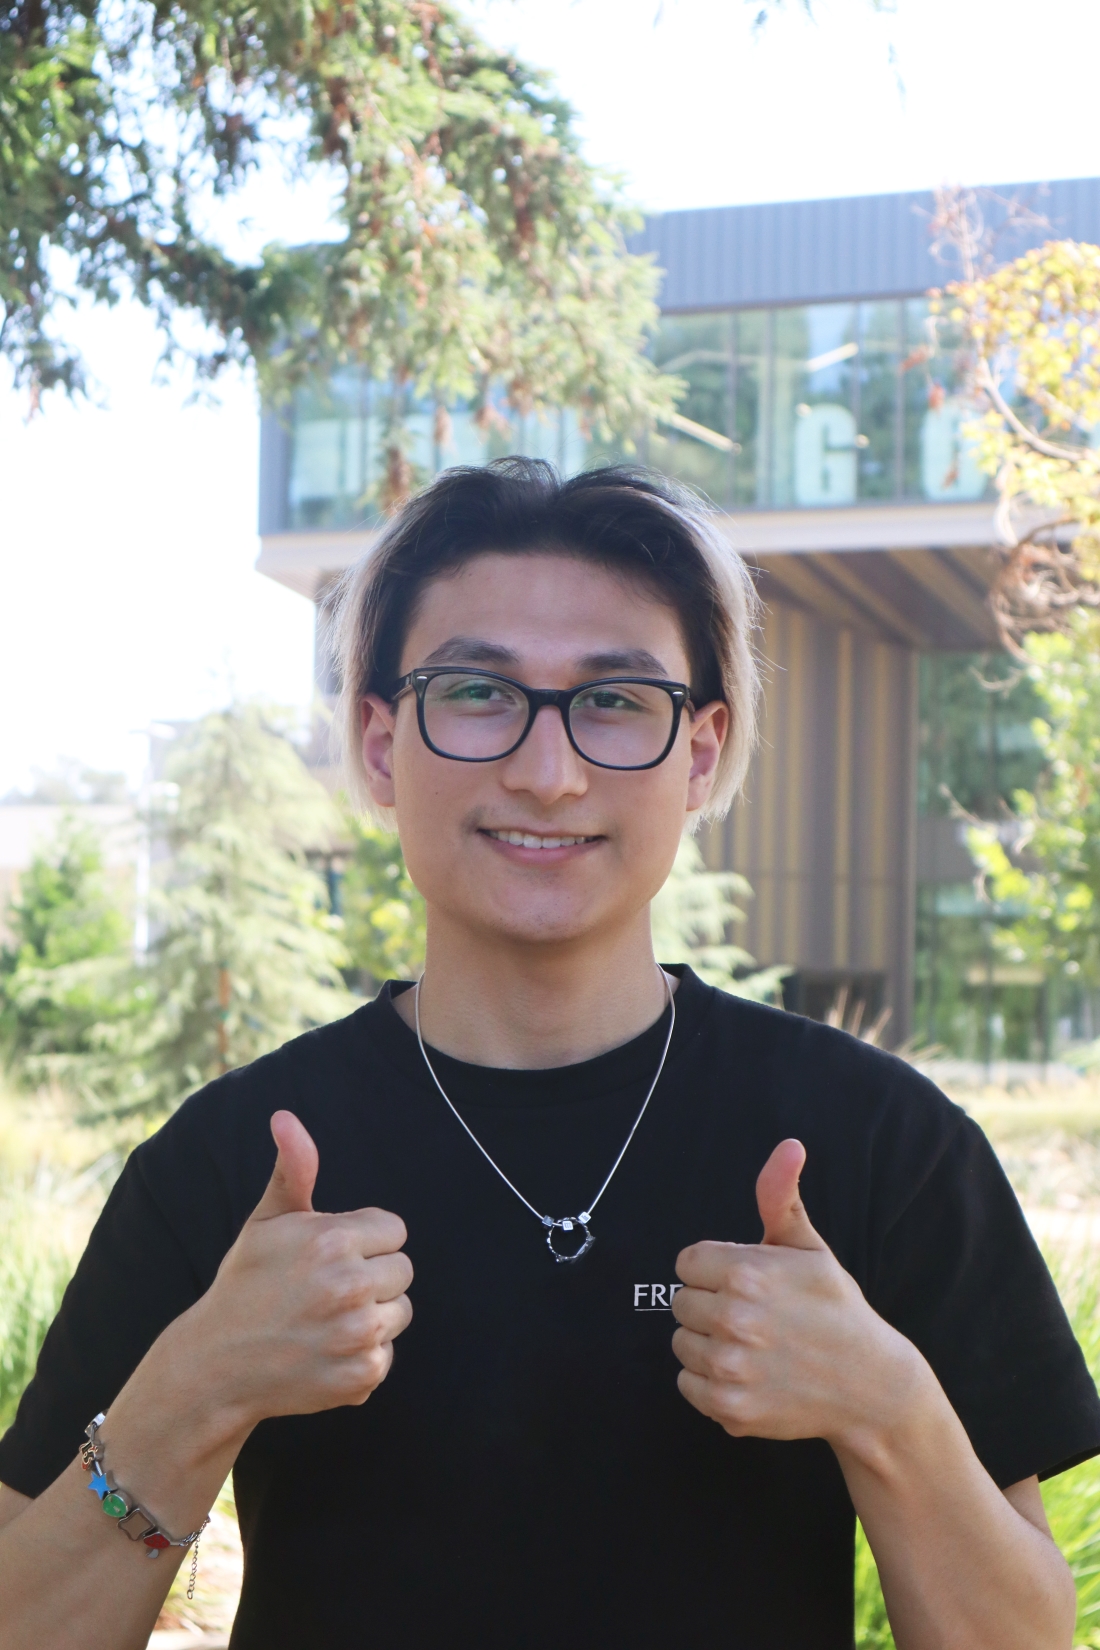 headshot of Nathan smiling and holding two thumbs up!